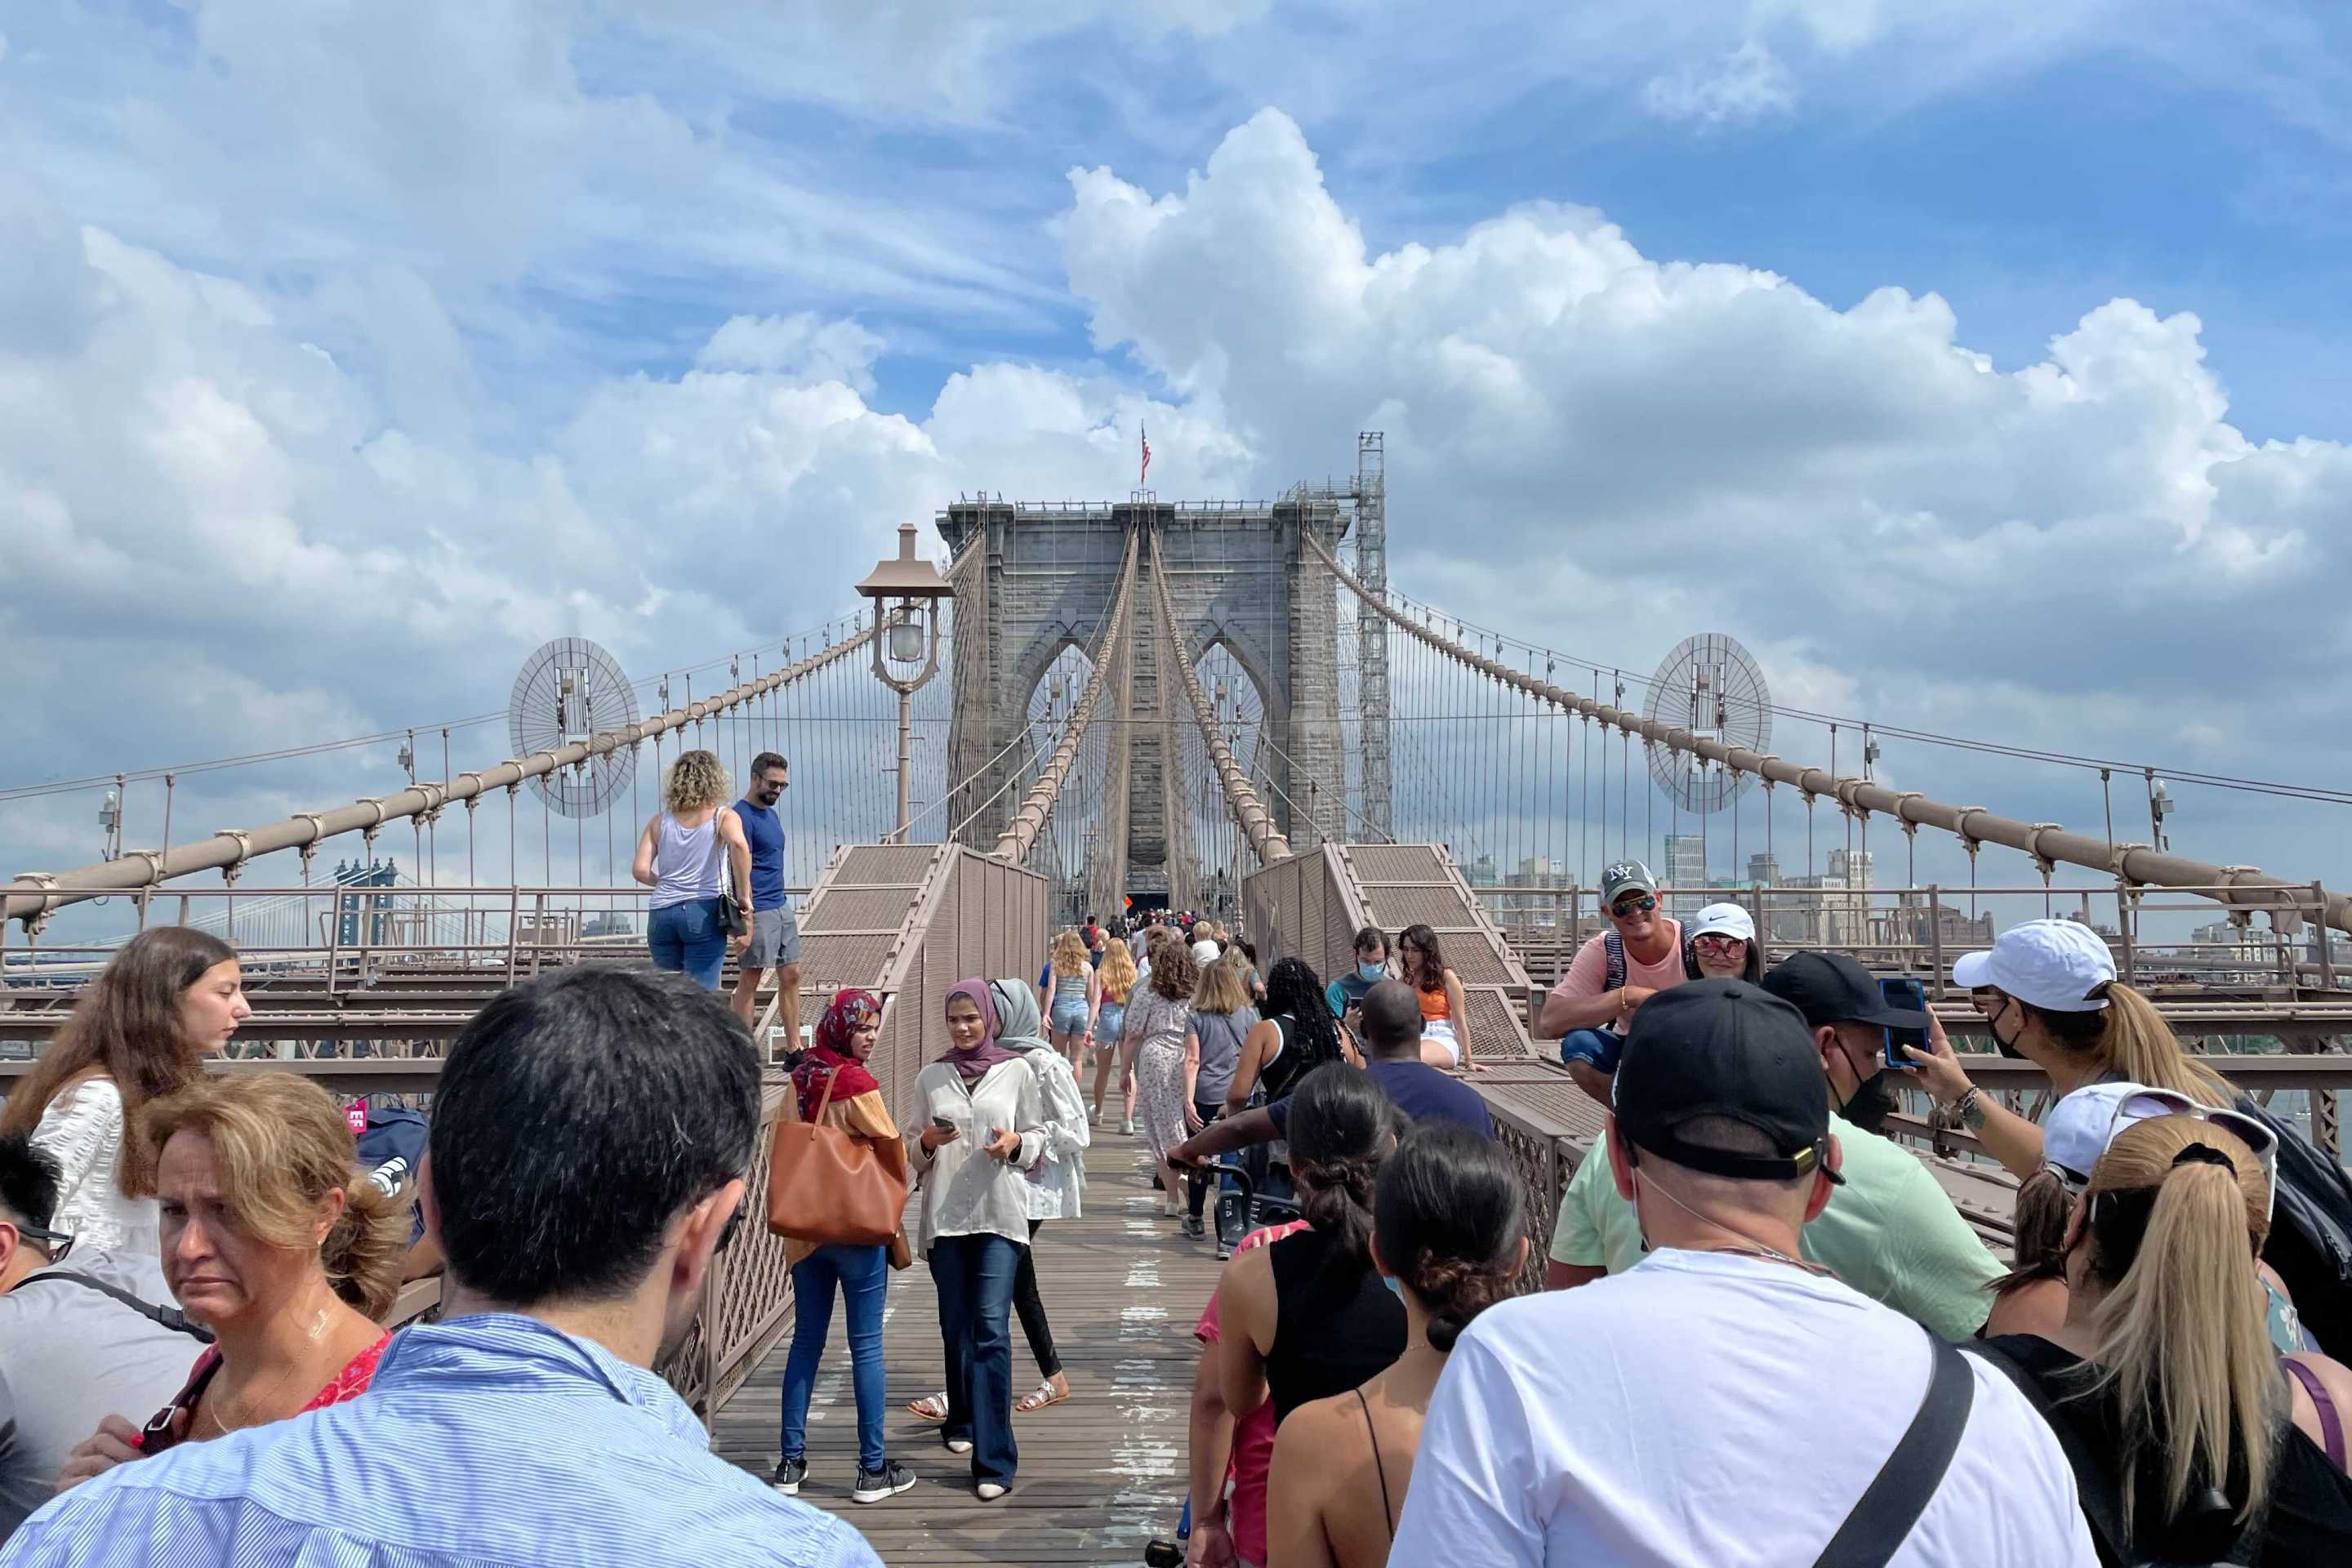 A large crowd of tourists stands on the Brooklyn Bridge walkway under sunny blue skies in July.